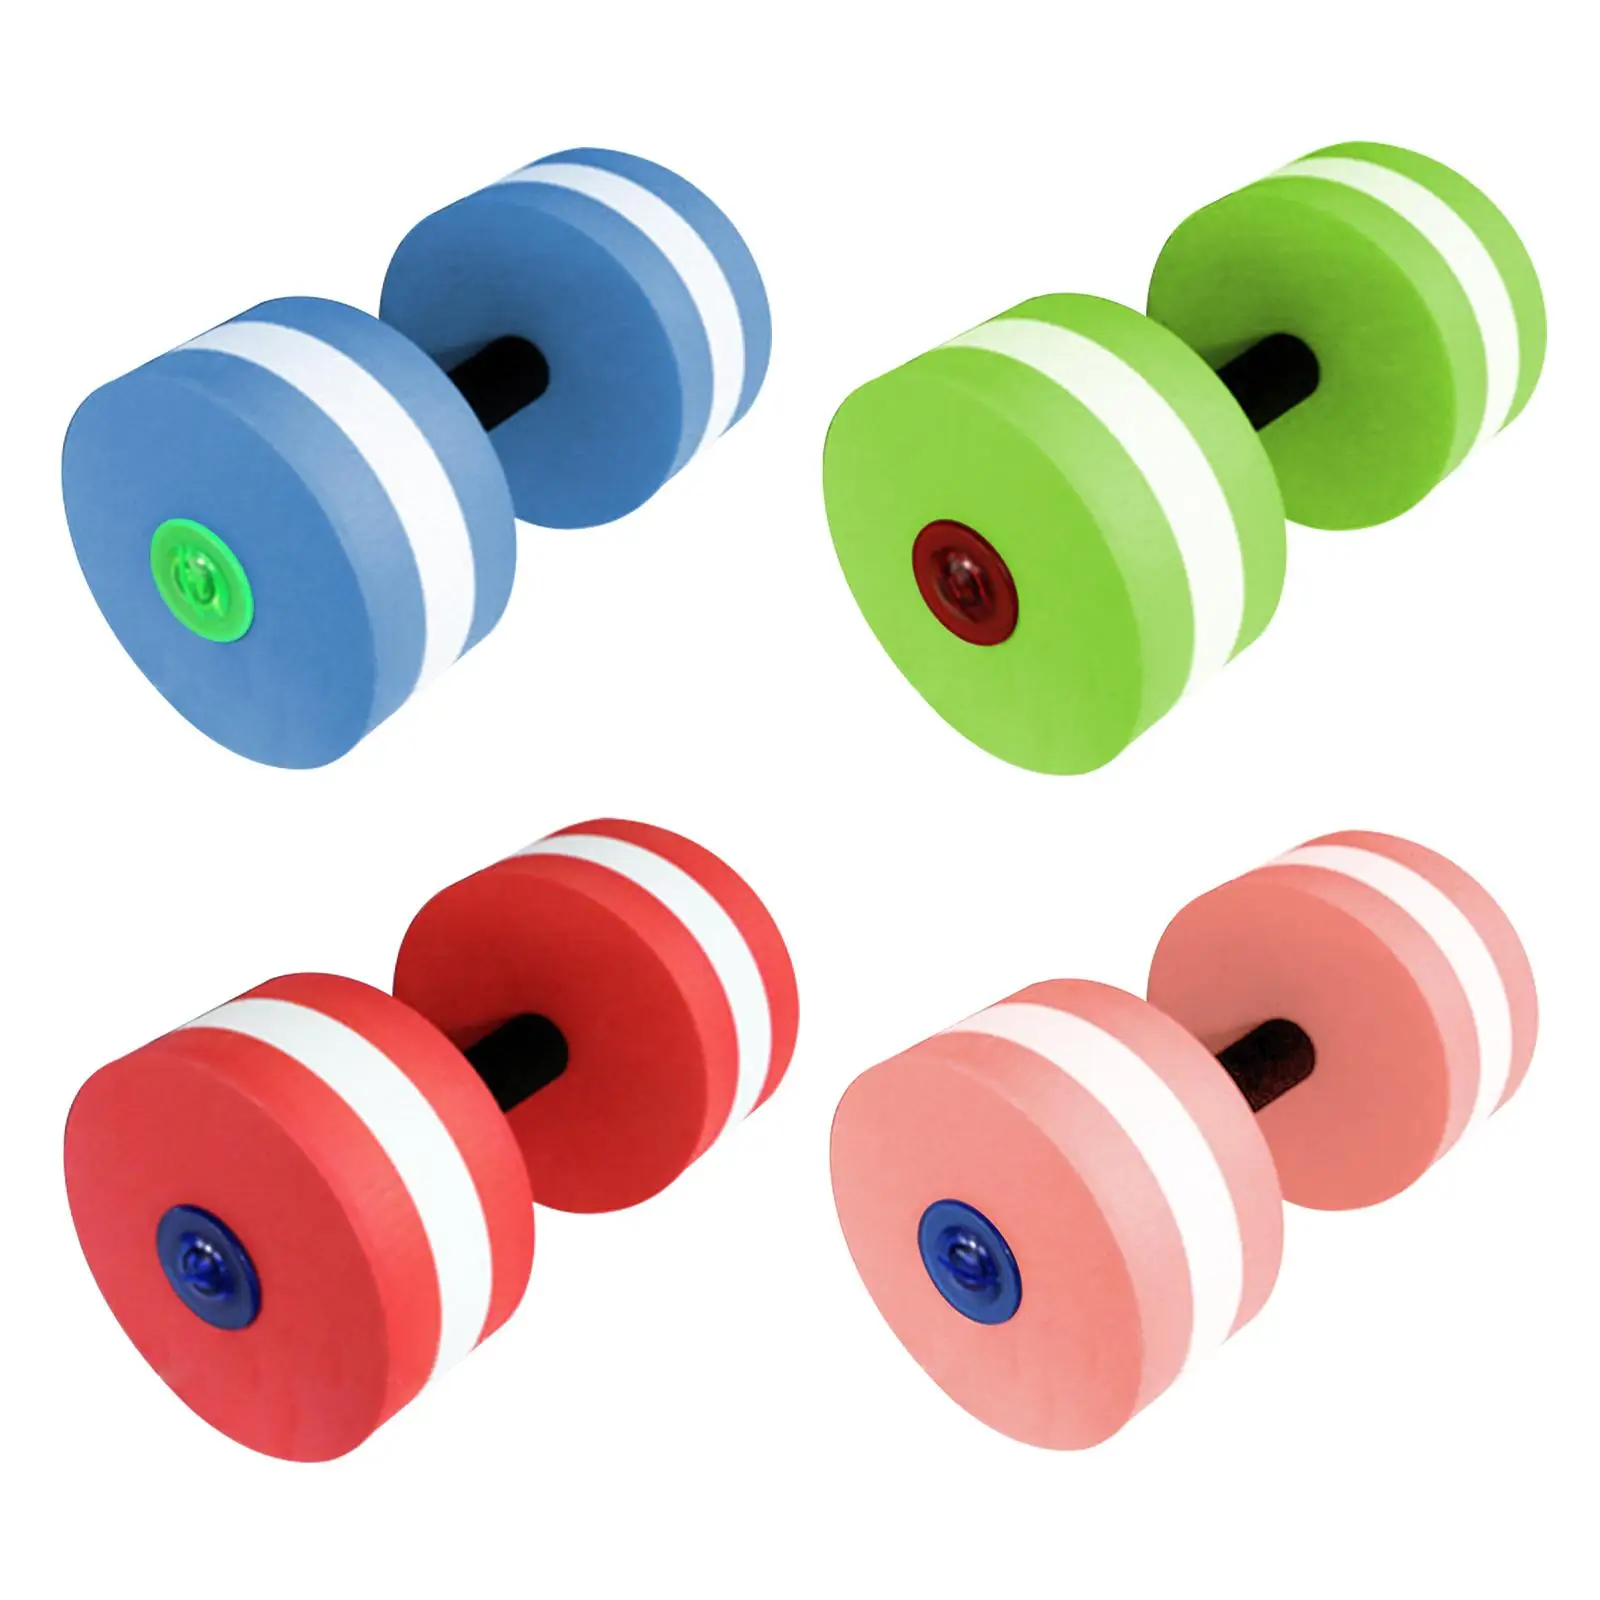 Aquatic Exercise Dumbell, Water Dumbbell Aquatic Barbell Float, for Water Sports